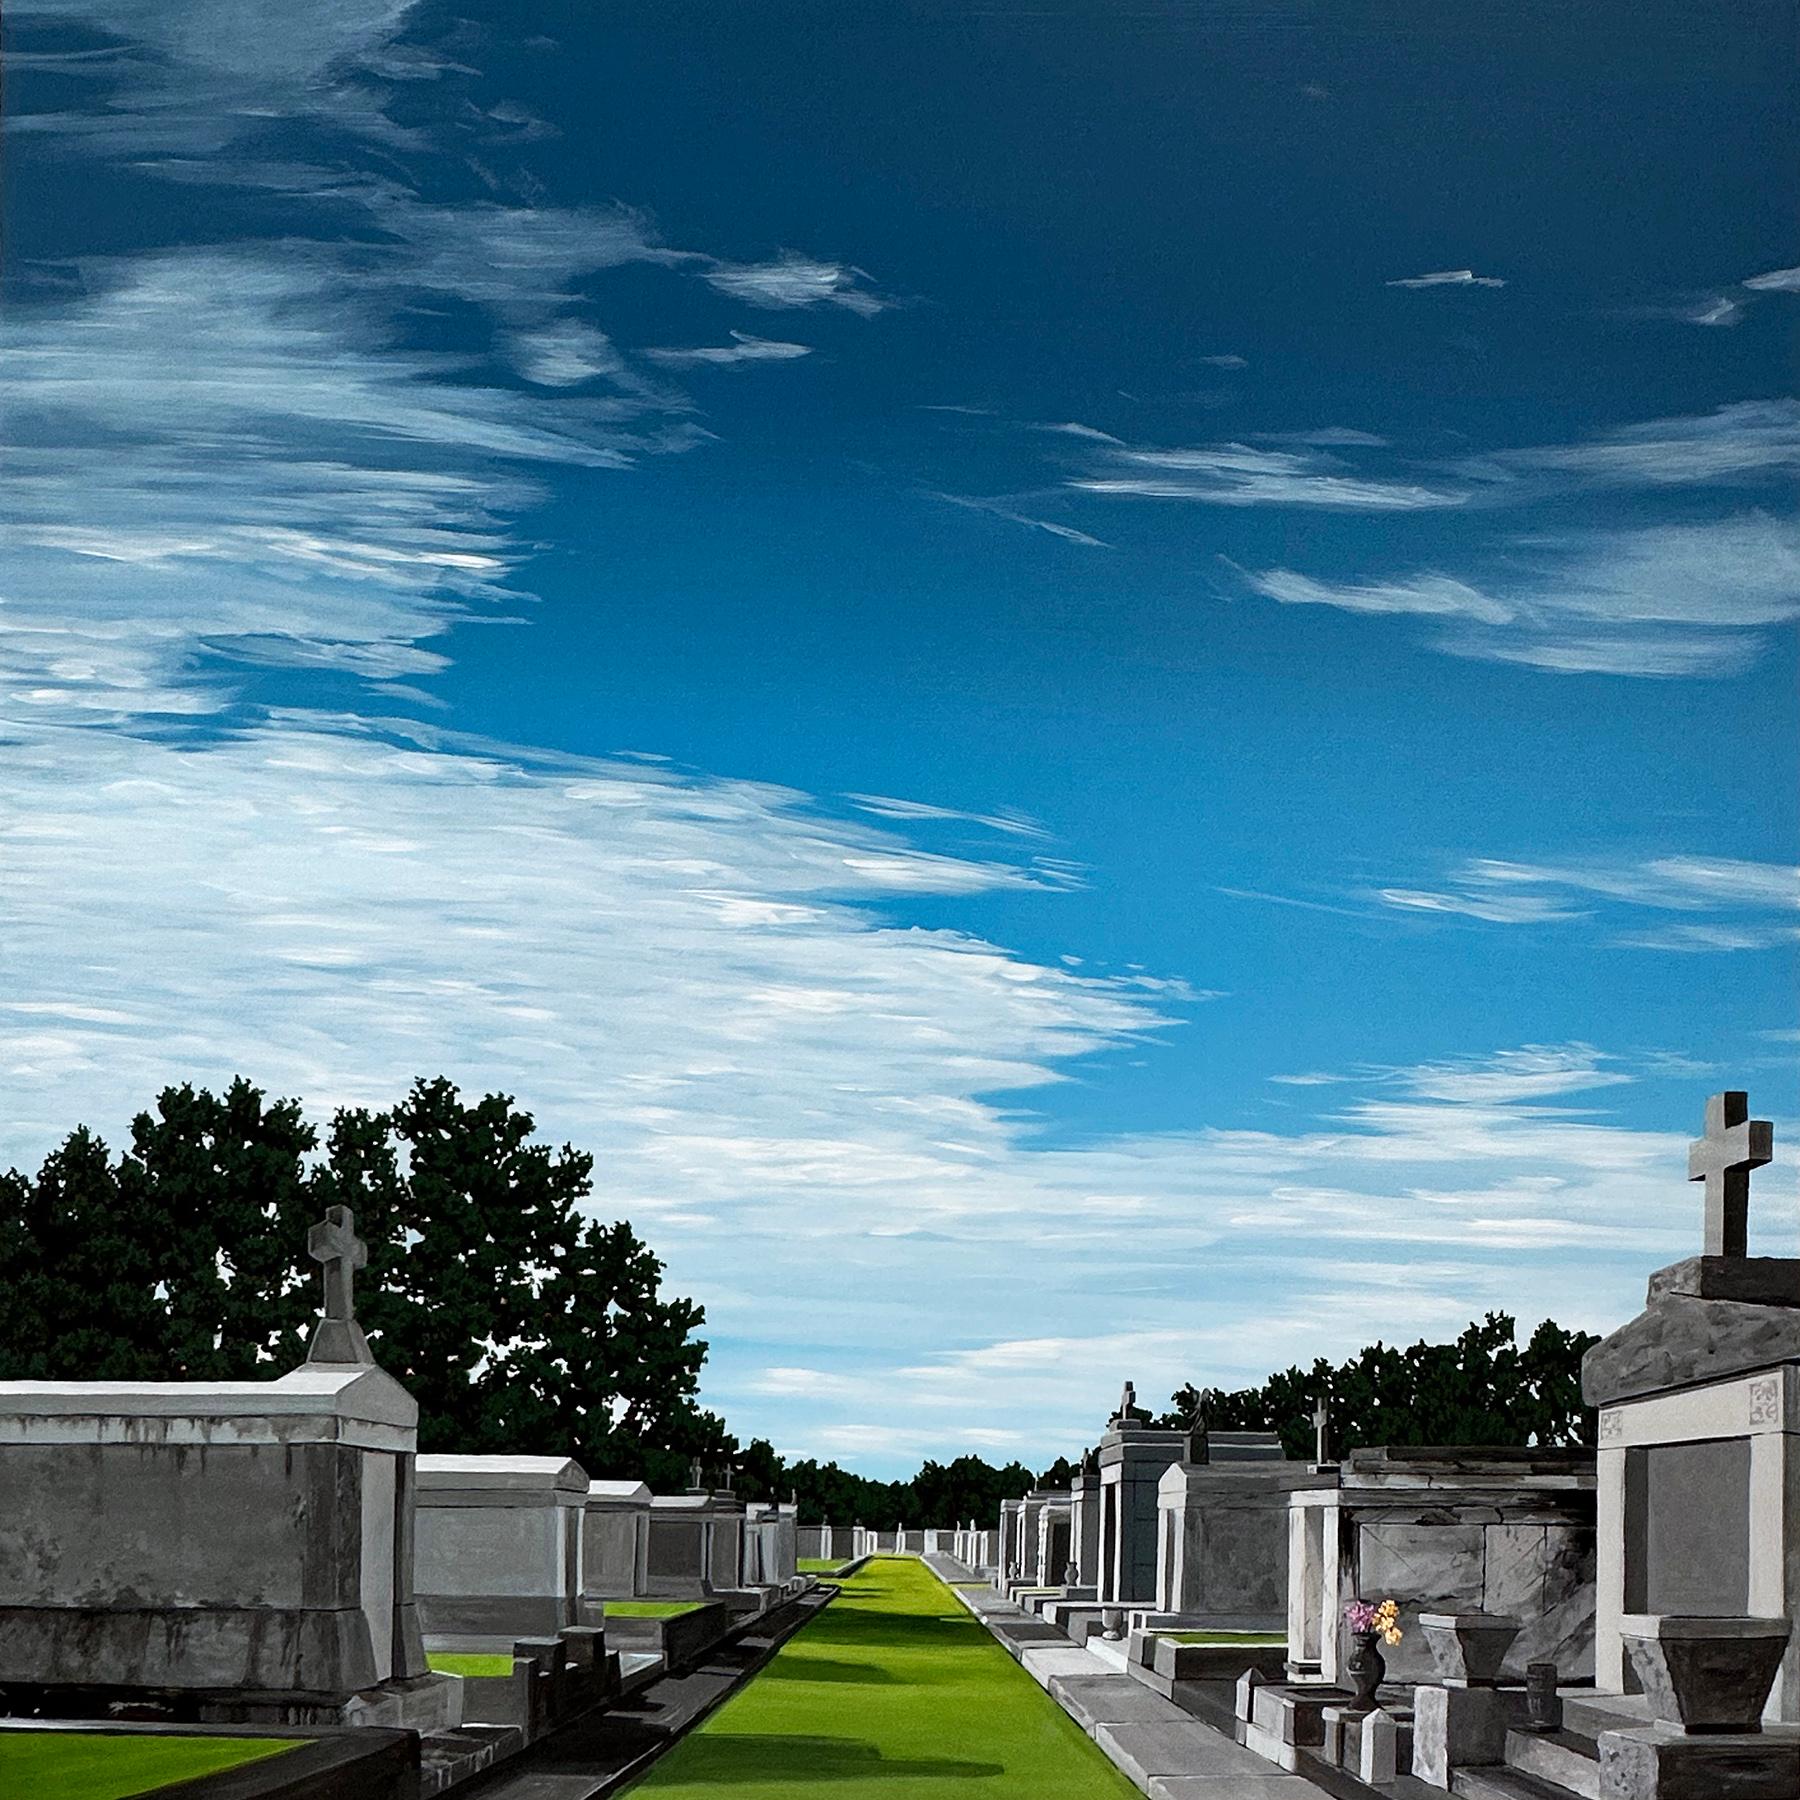 "Metairie Cemetery", by Kristin Moore, is a part of her 2024 solo exhibition, “Through the Bayou, Into the Garden”, at Ferrara Showman Gallery. Marking a transition from her previous work, "Metairie Cemetery" shows Kristin Moore directing her eye